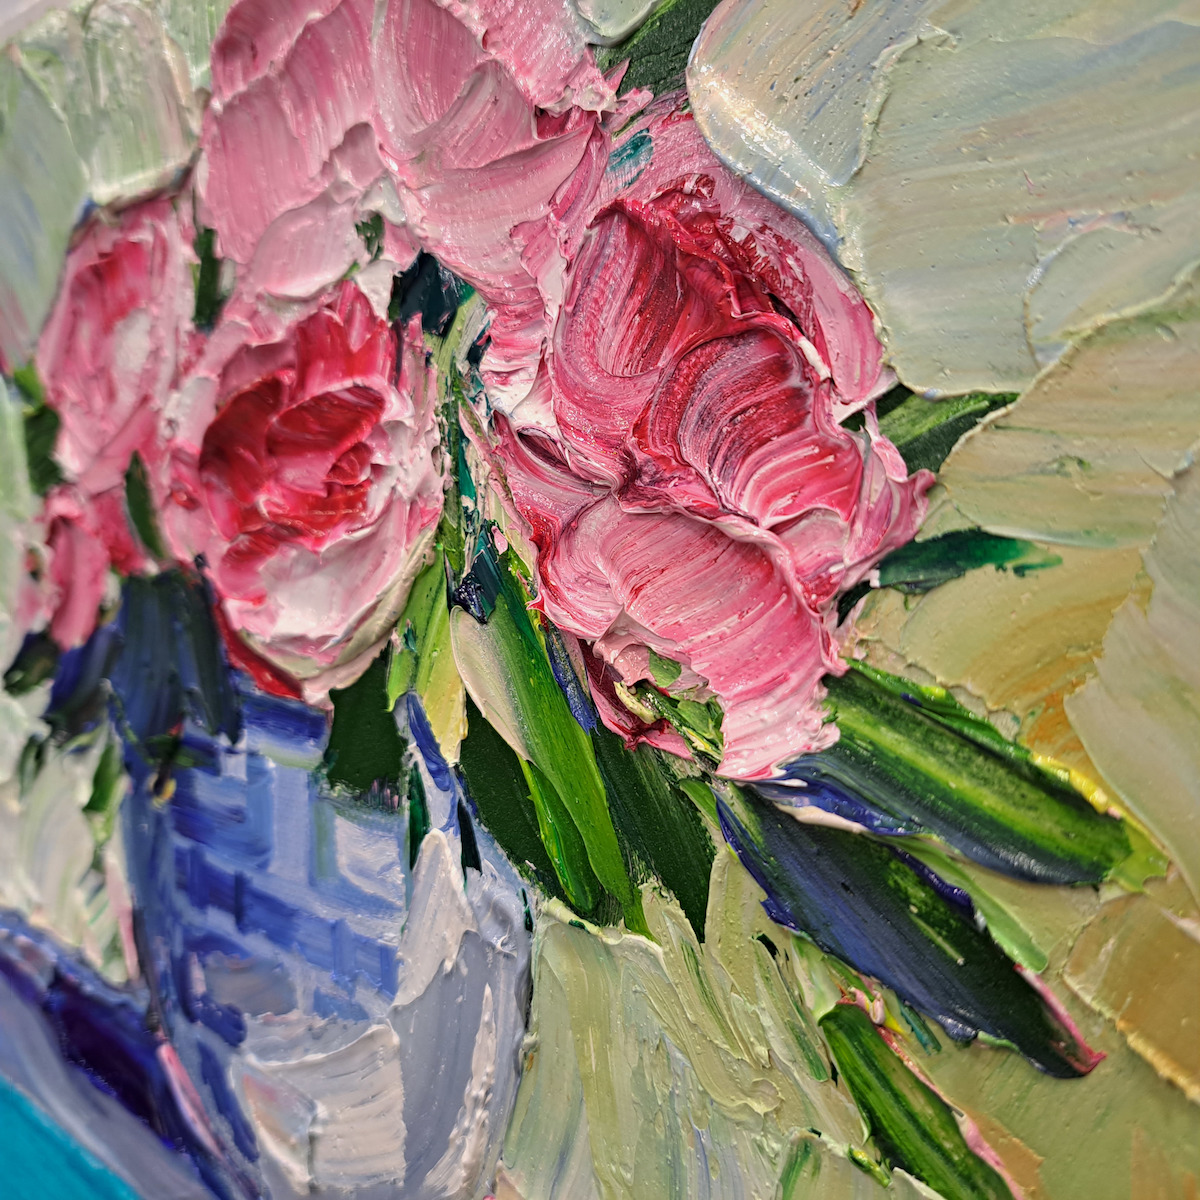 Creation Stage 3 Of Original Still Life Painting "Peonies in Ginger Jar" By Judith Dalozzo